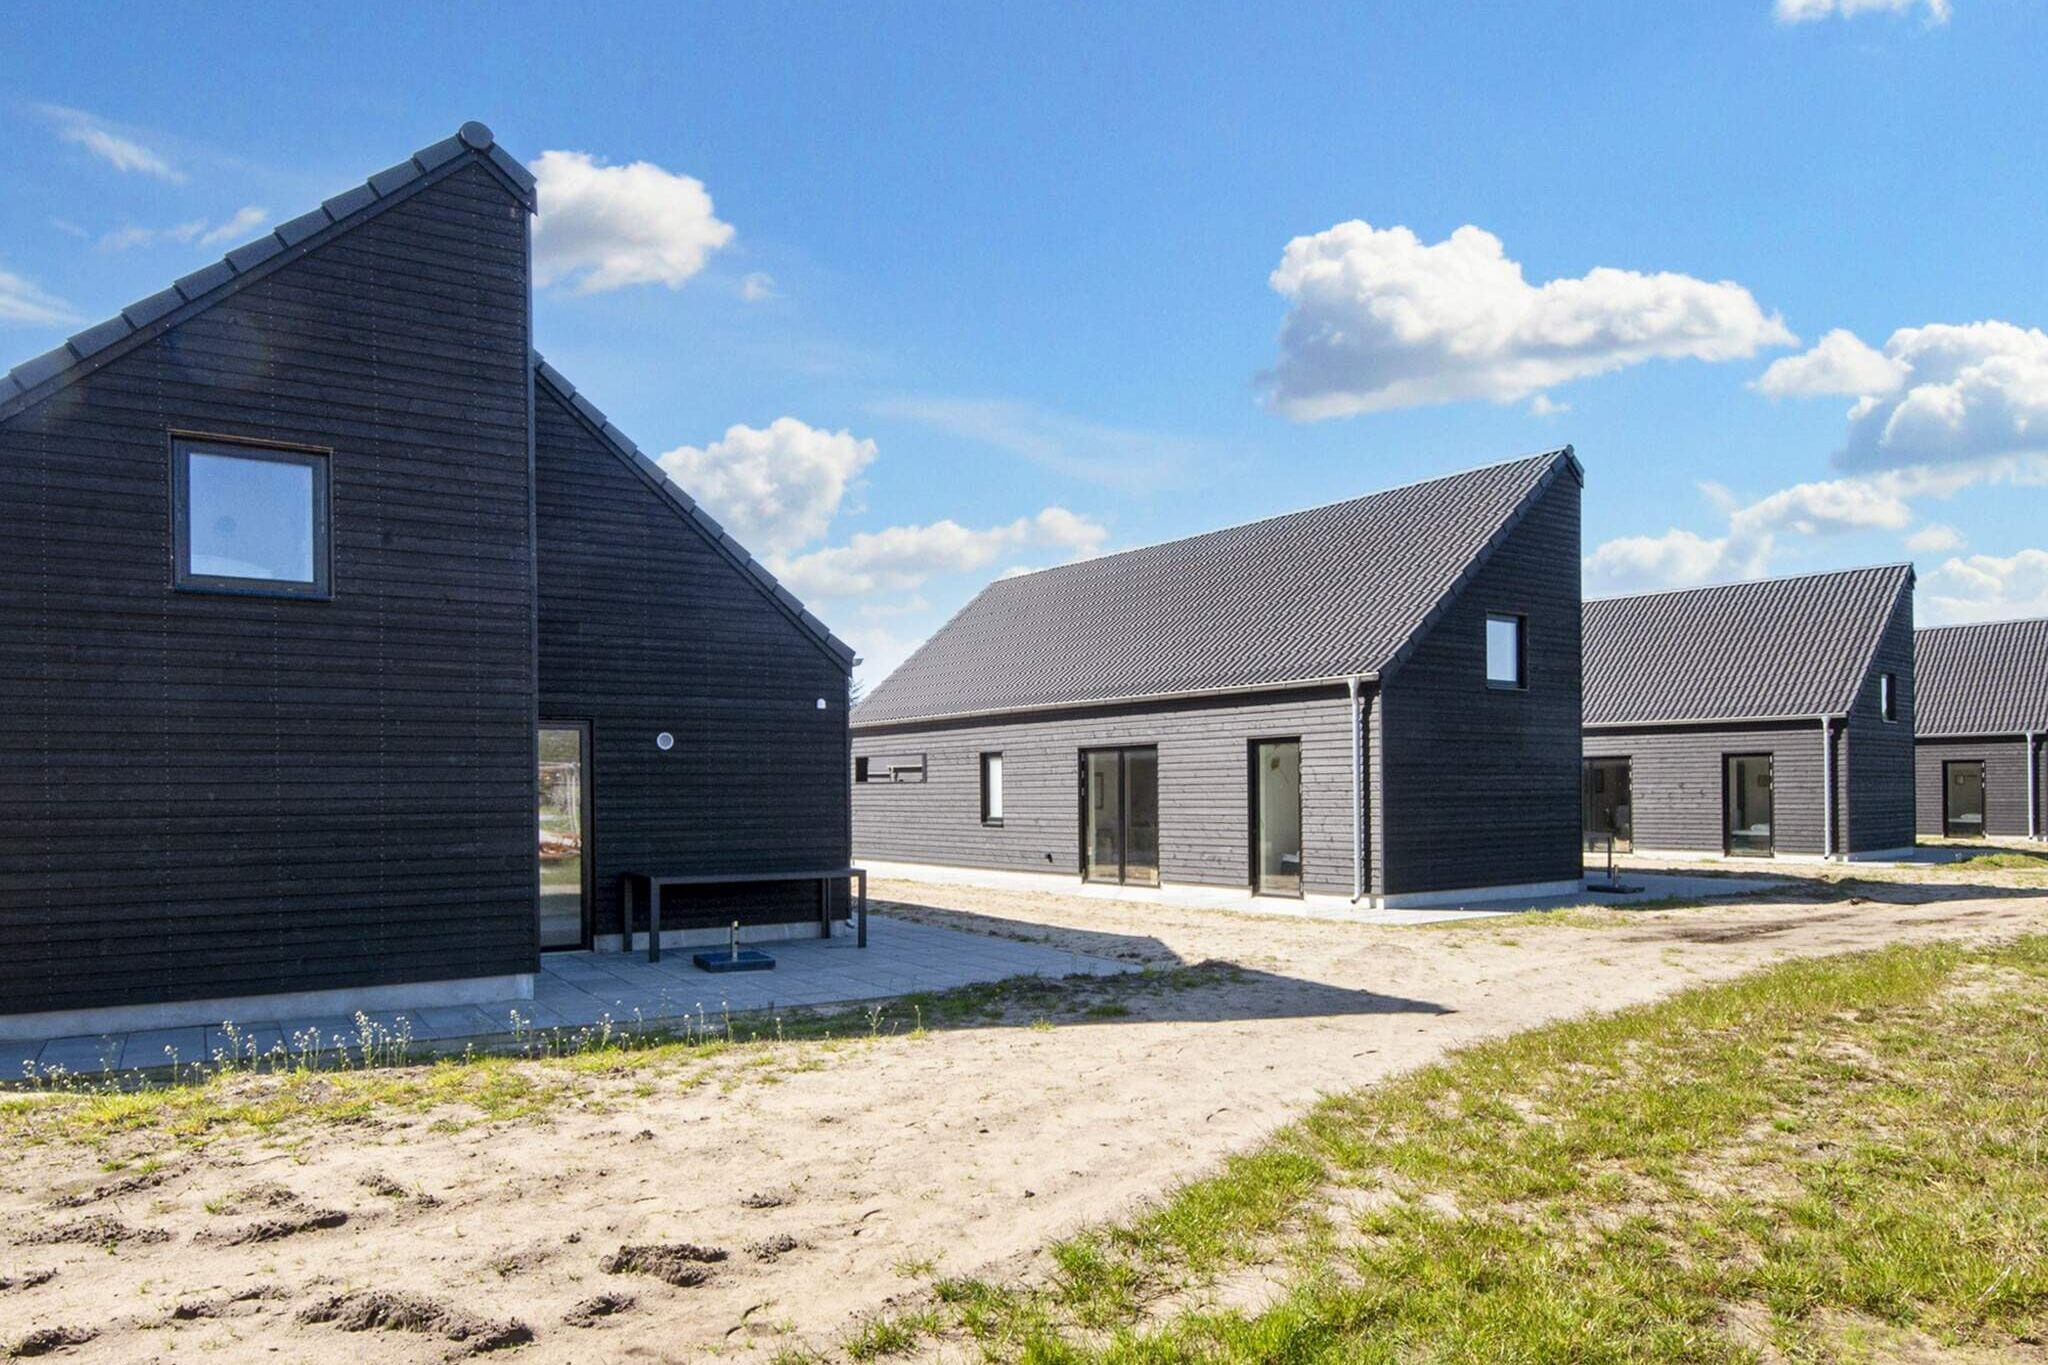 8 person holiday home in Rømø